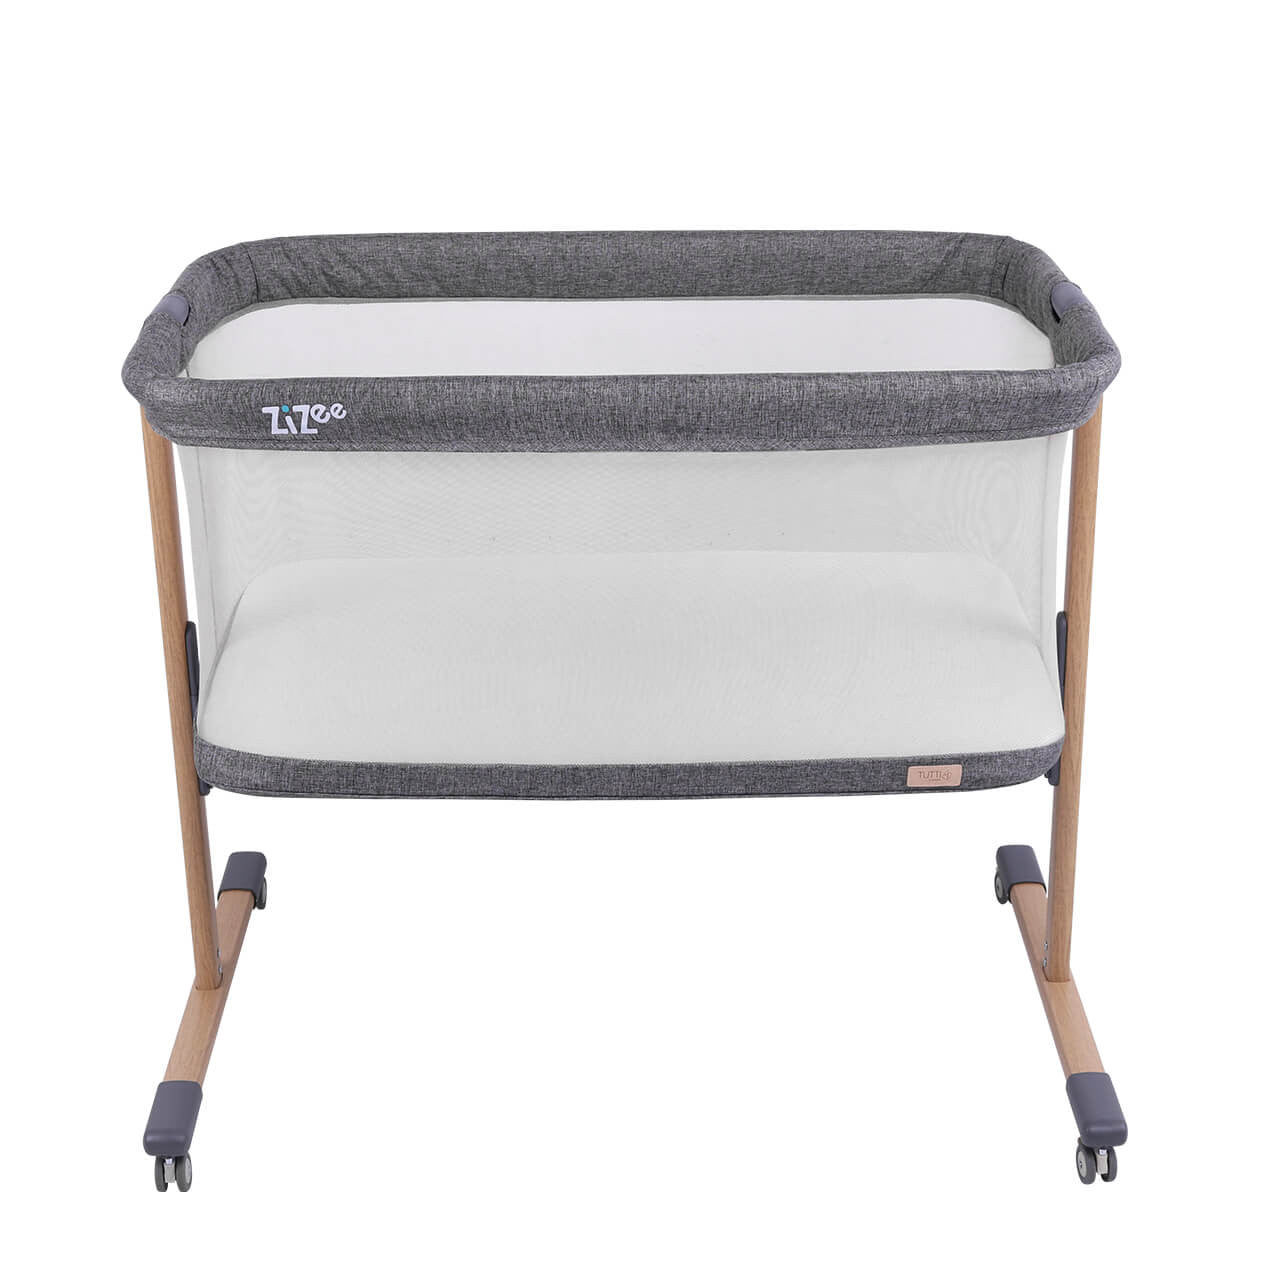 Tutti Bambini Zizee® Breathable Rocking Crib Bundle - Oak and Charcoal -  | For Your Little One